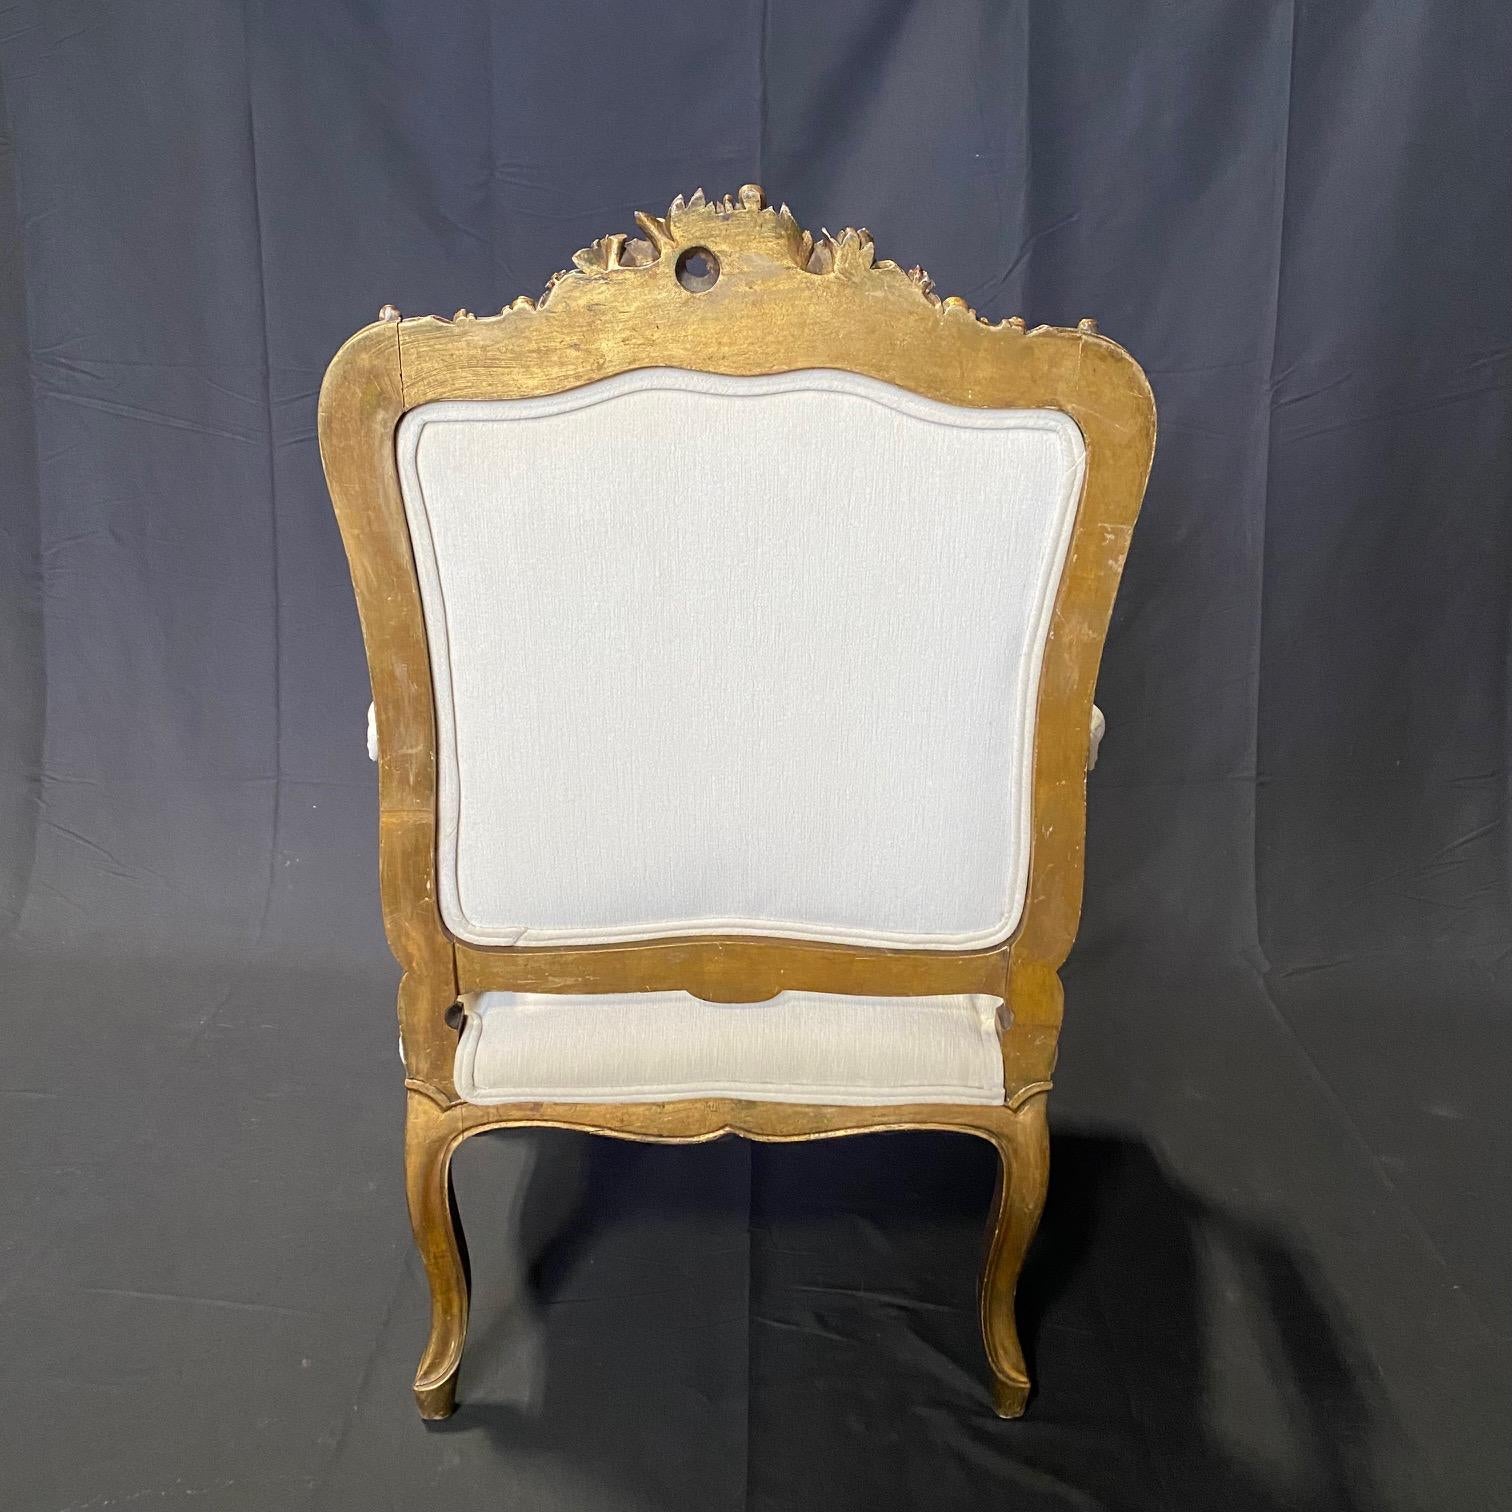 This pair of fauteuil armchairs, newly upholstered in neutral fabric, is very elegant, with exquisitely carved, elegant back rests, aprons and armrests. Antique sturdy frame, original gold gilt paint with exquisitely carved gilt gold accent overlay,